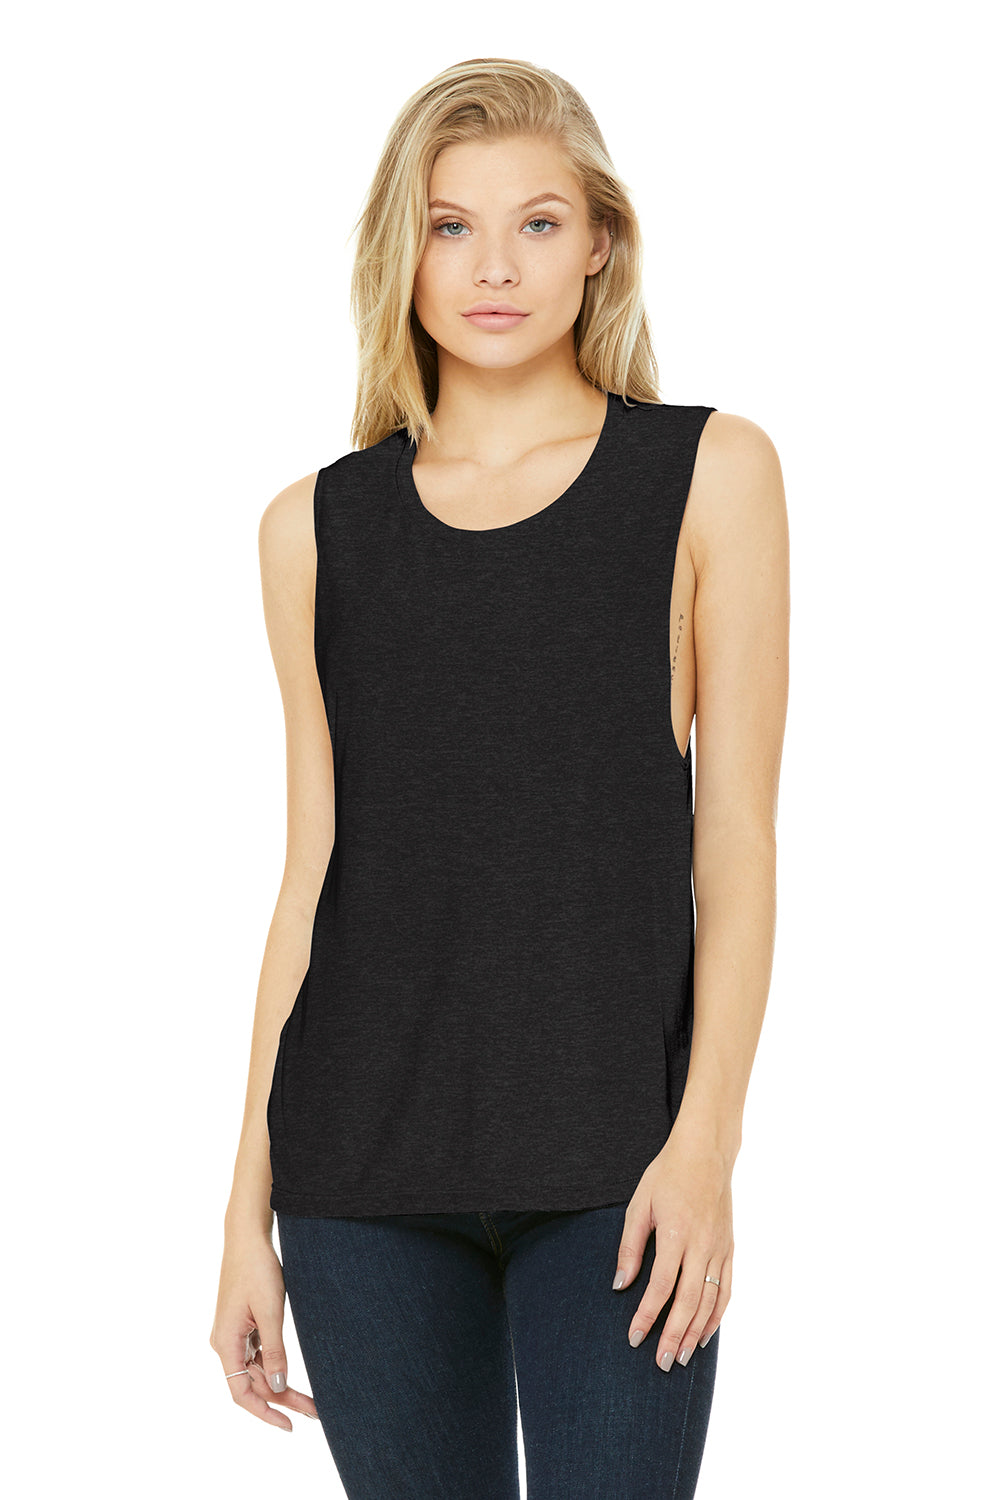 Bella + Canvas BC8803/B8803/8803 Womens Flowy Muscle Tank Top Heather Black Model Front